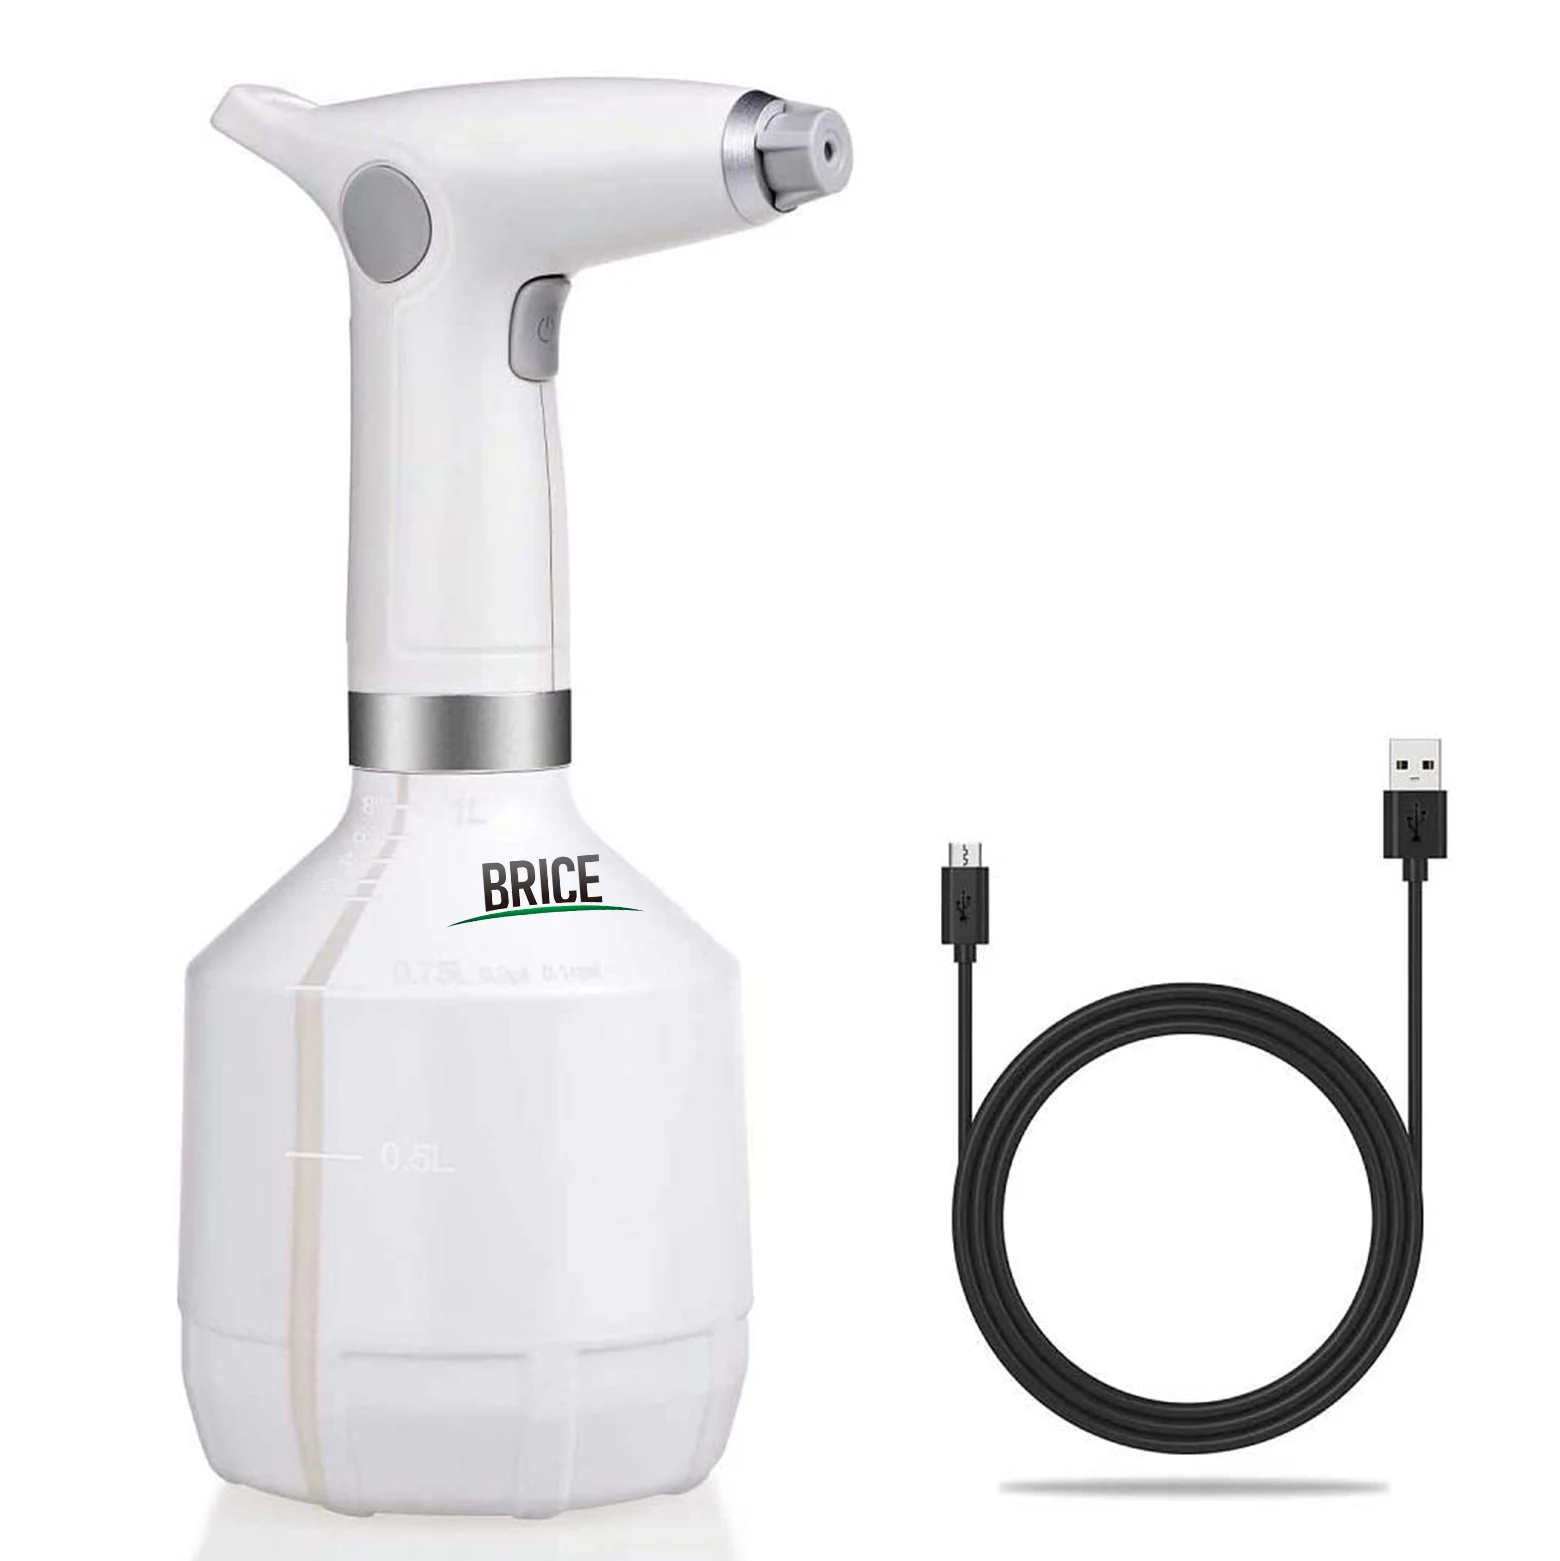 

Free Sample 1L Plastic Bottle Hand Held Electric Sprayer with CE Approved USB Charge, Plastic Battery Garden Water Mist sprayer, White,blue,green,pink